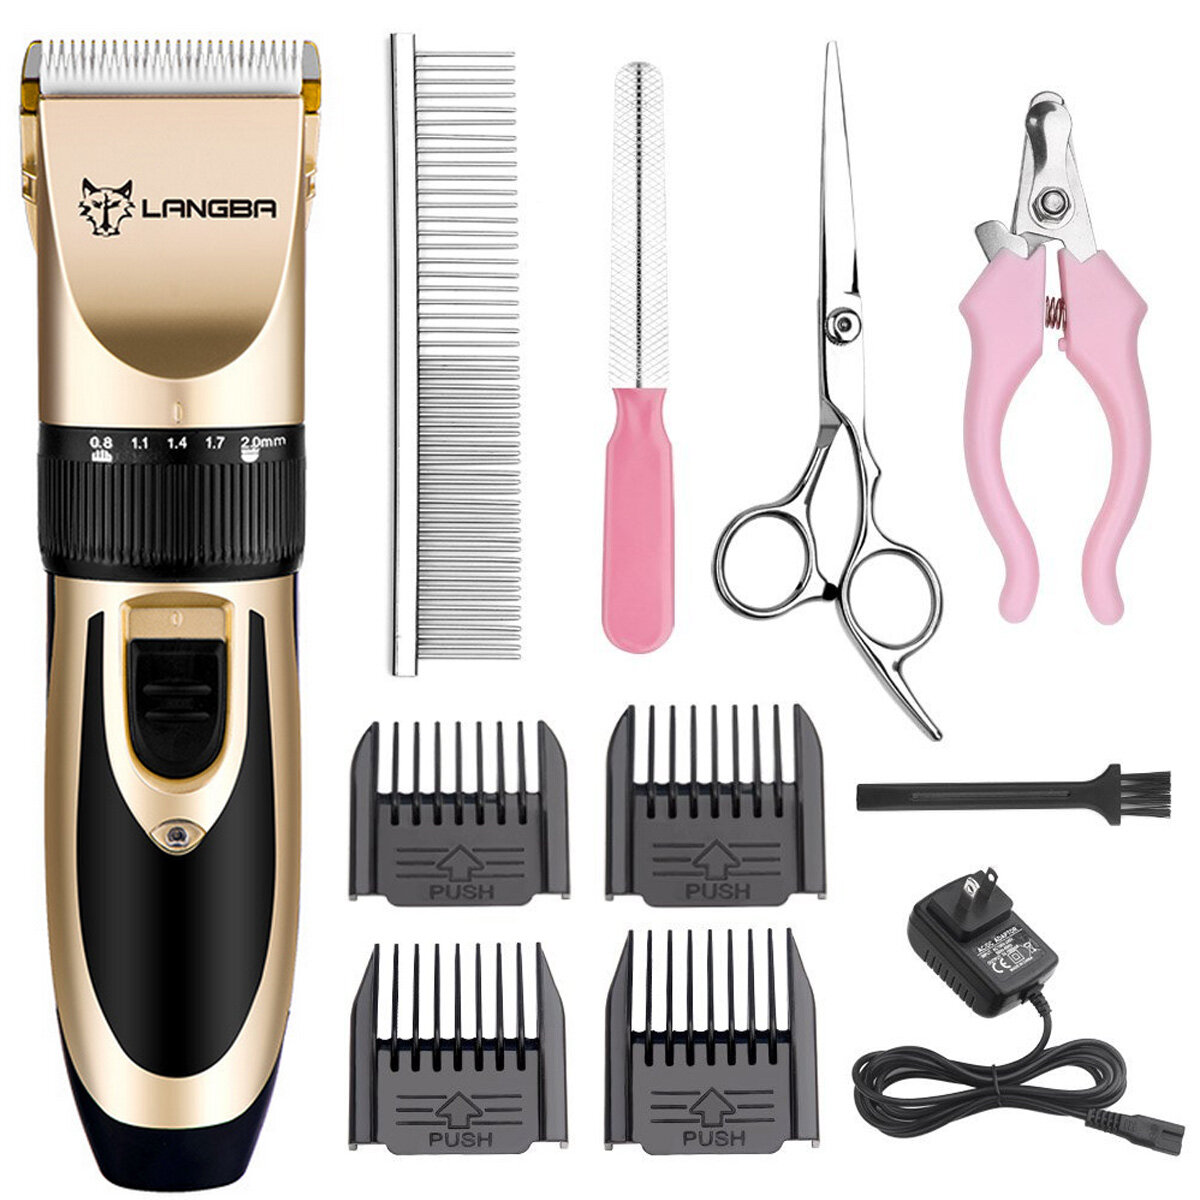 Electric Hair Clippers Scissors&Shears Shaver Trimmer Grooming Cordless Cat Dog Hair Trimmer